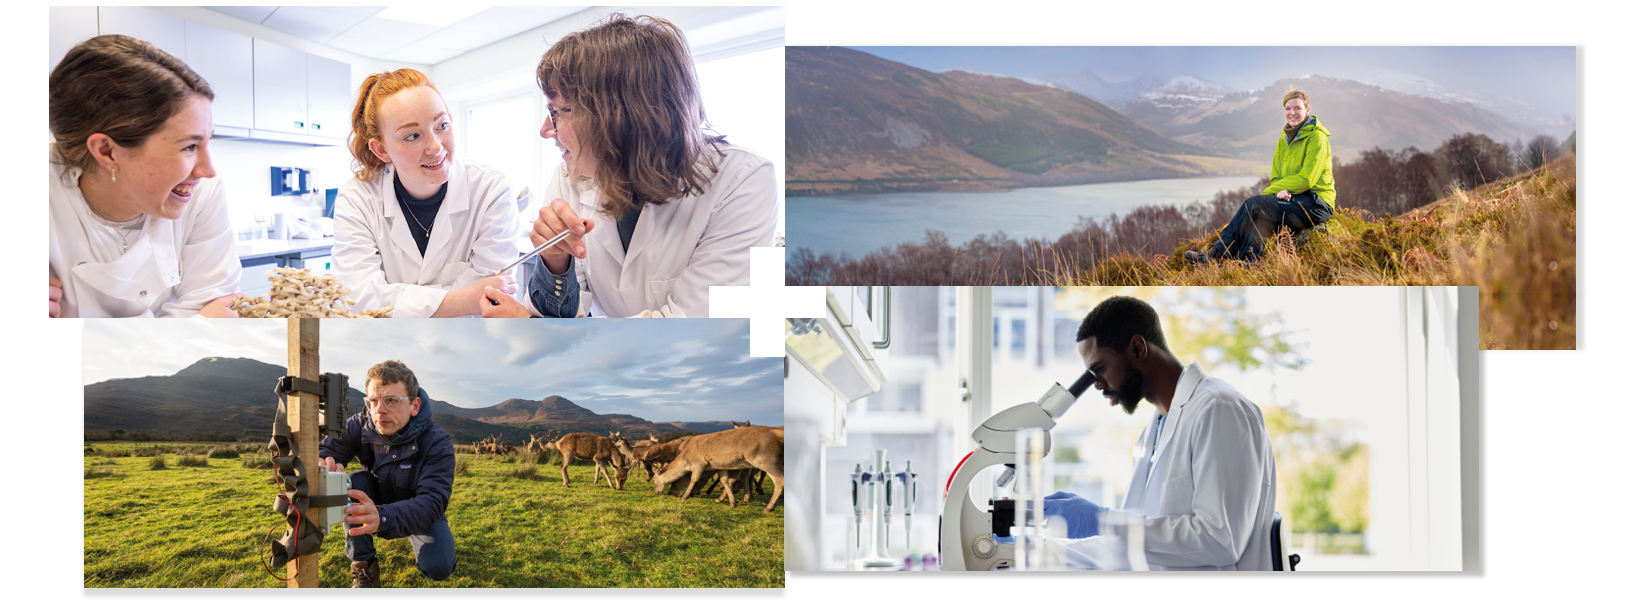 Collage of 4 | Students in a laboratory | A student on a hill | A person conducting an experiment in a glen | A person looking through a microscope